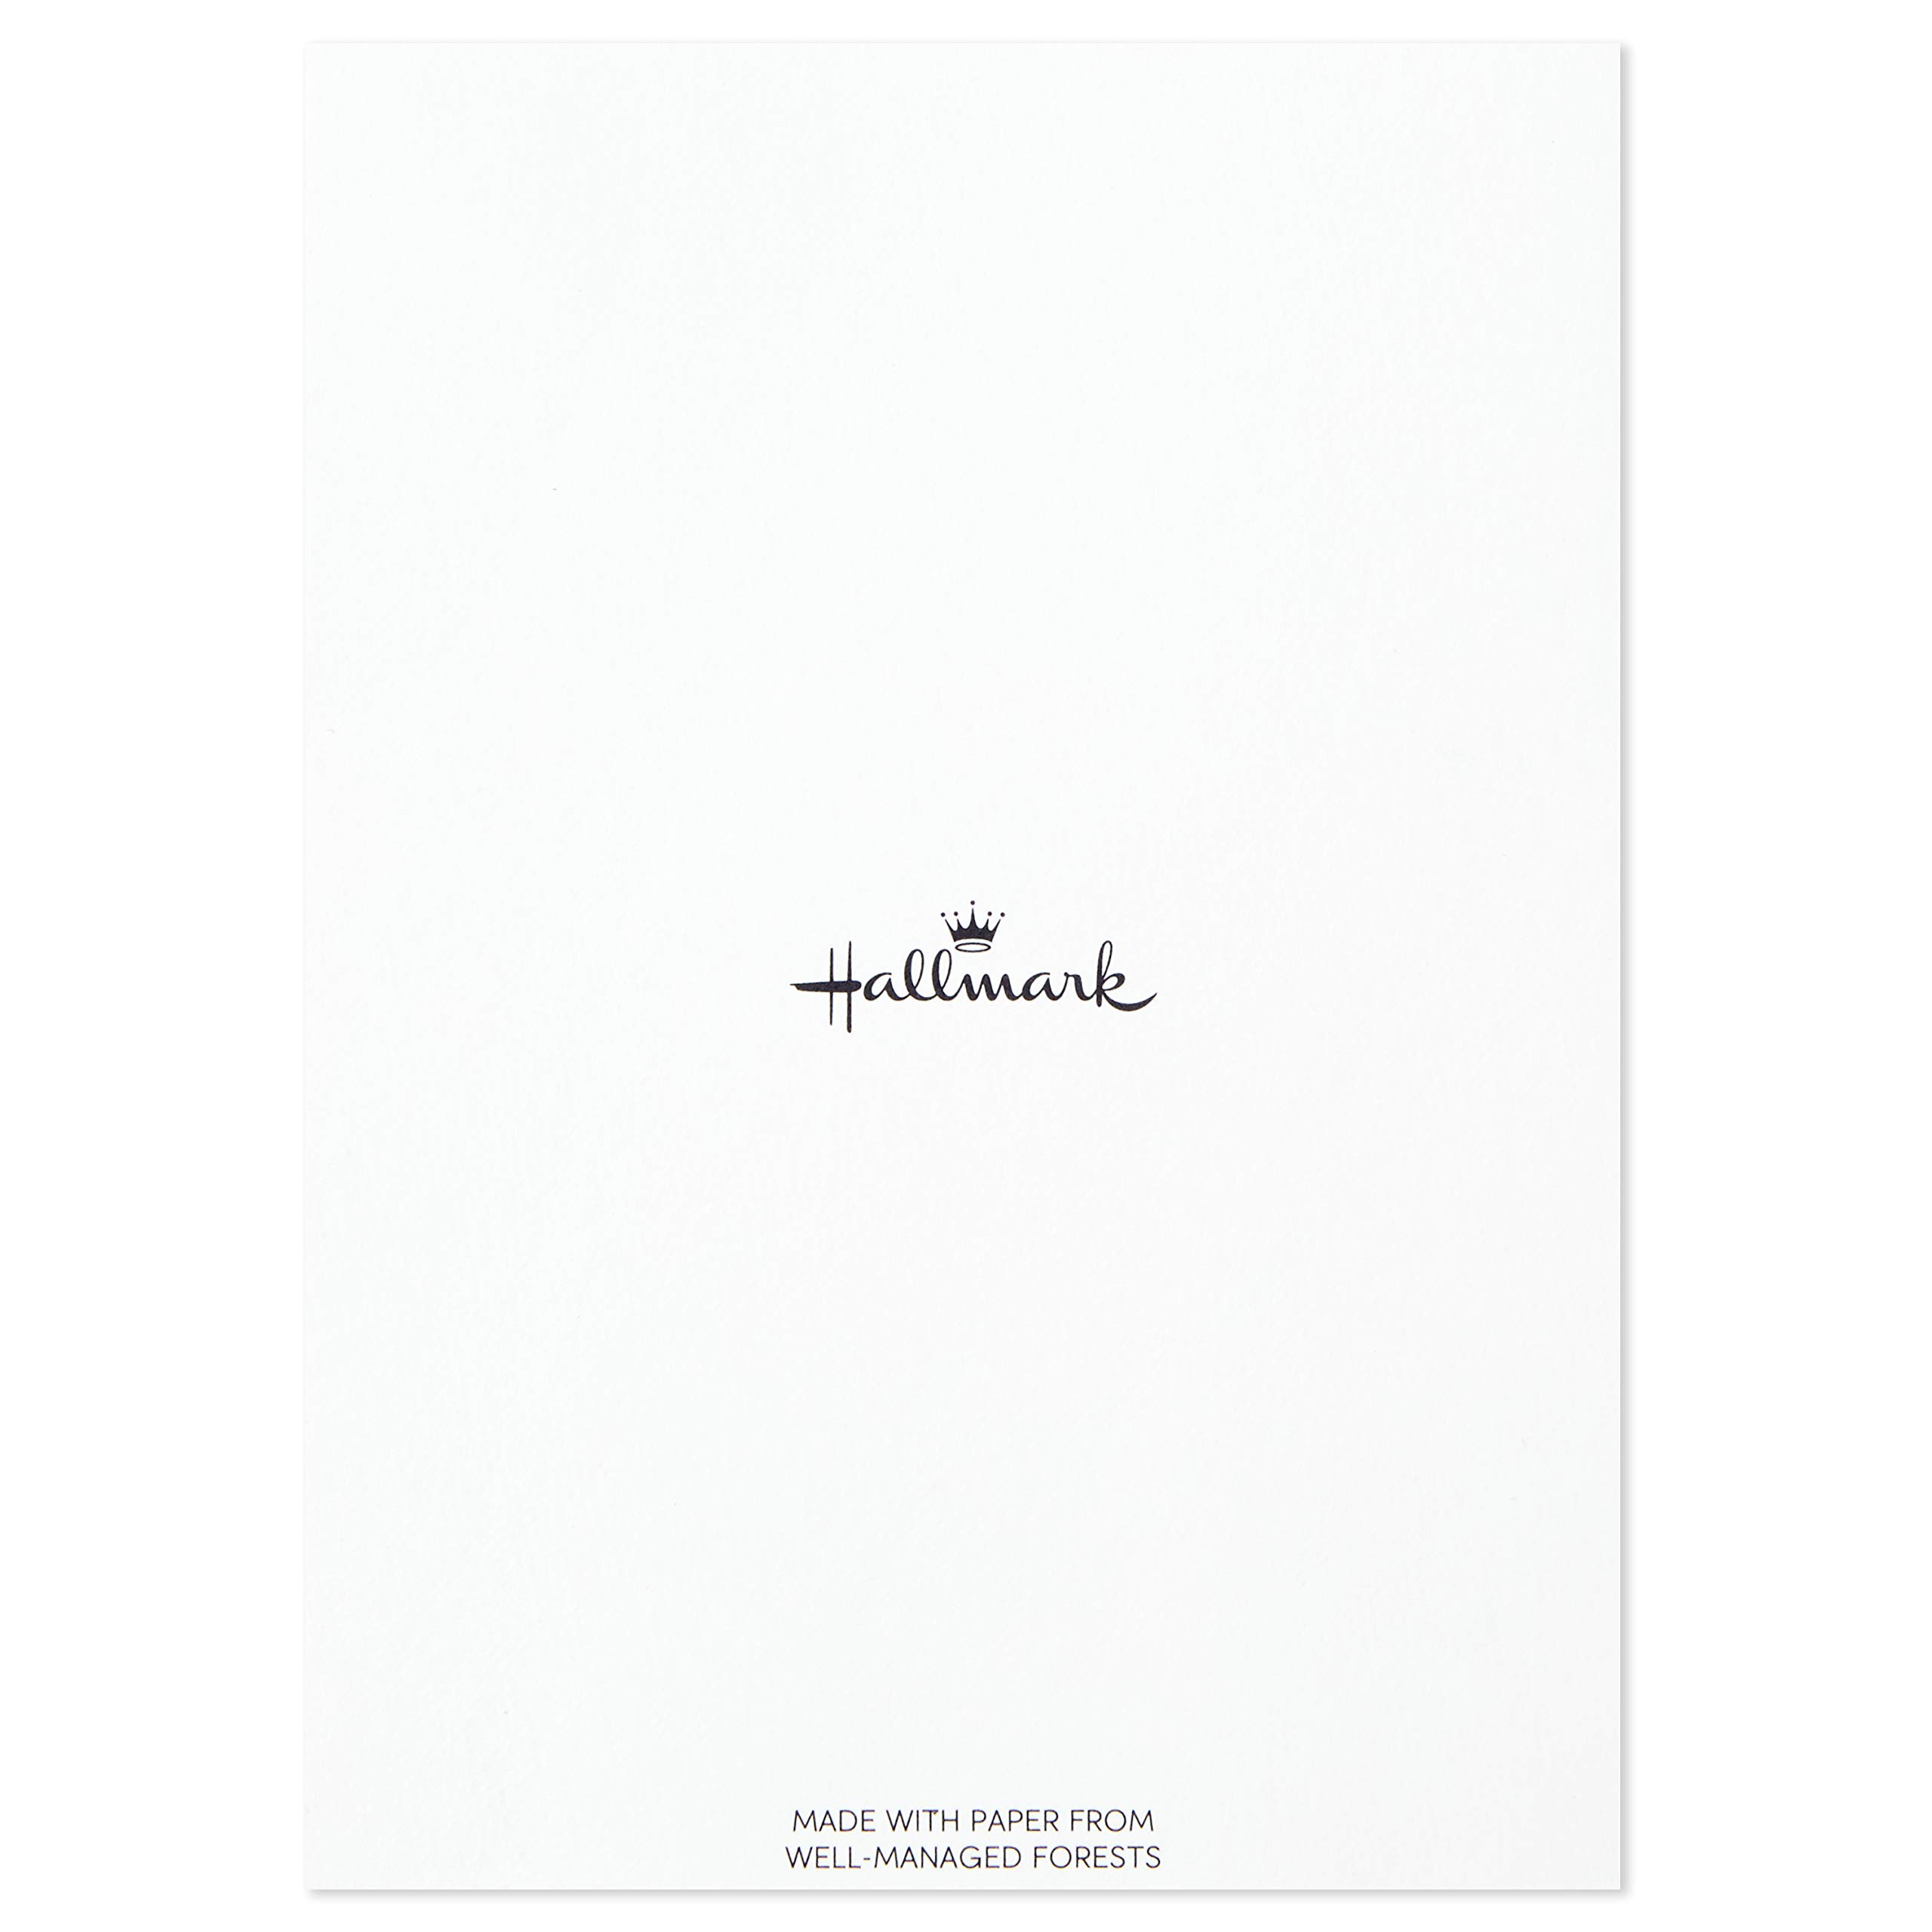 Hallmark Congratulations Card and Graduation Card Assortment (Boxed Set of 24 Cards with Envelopes)